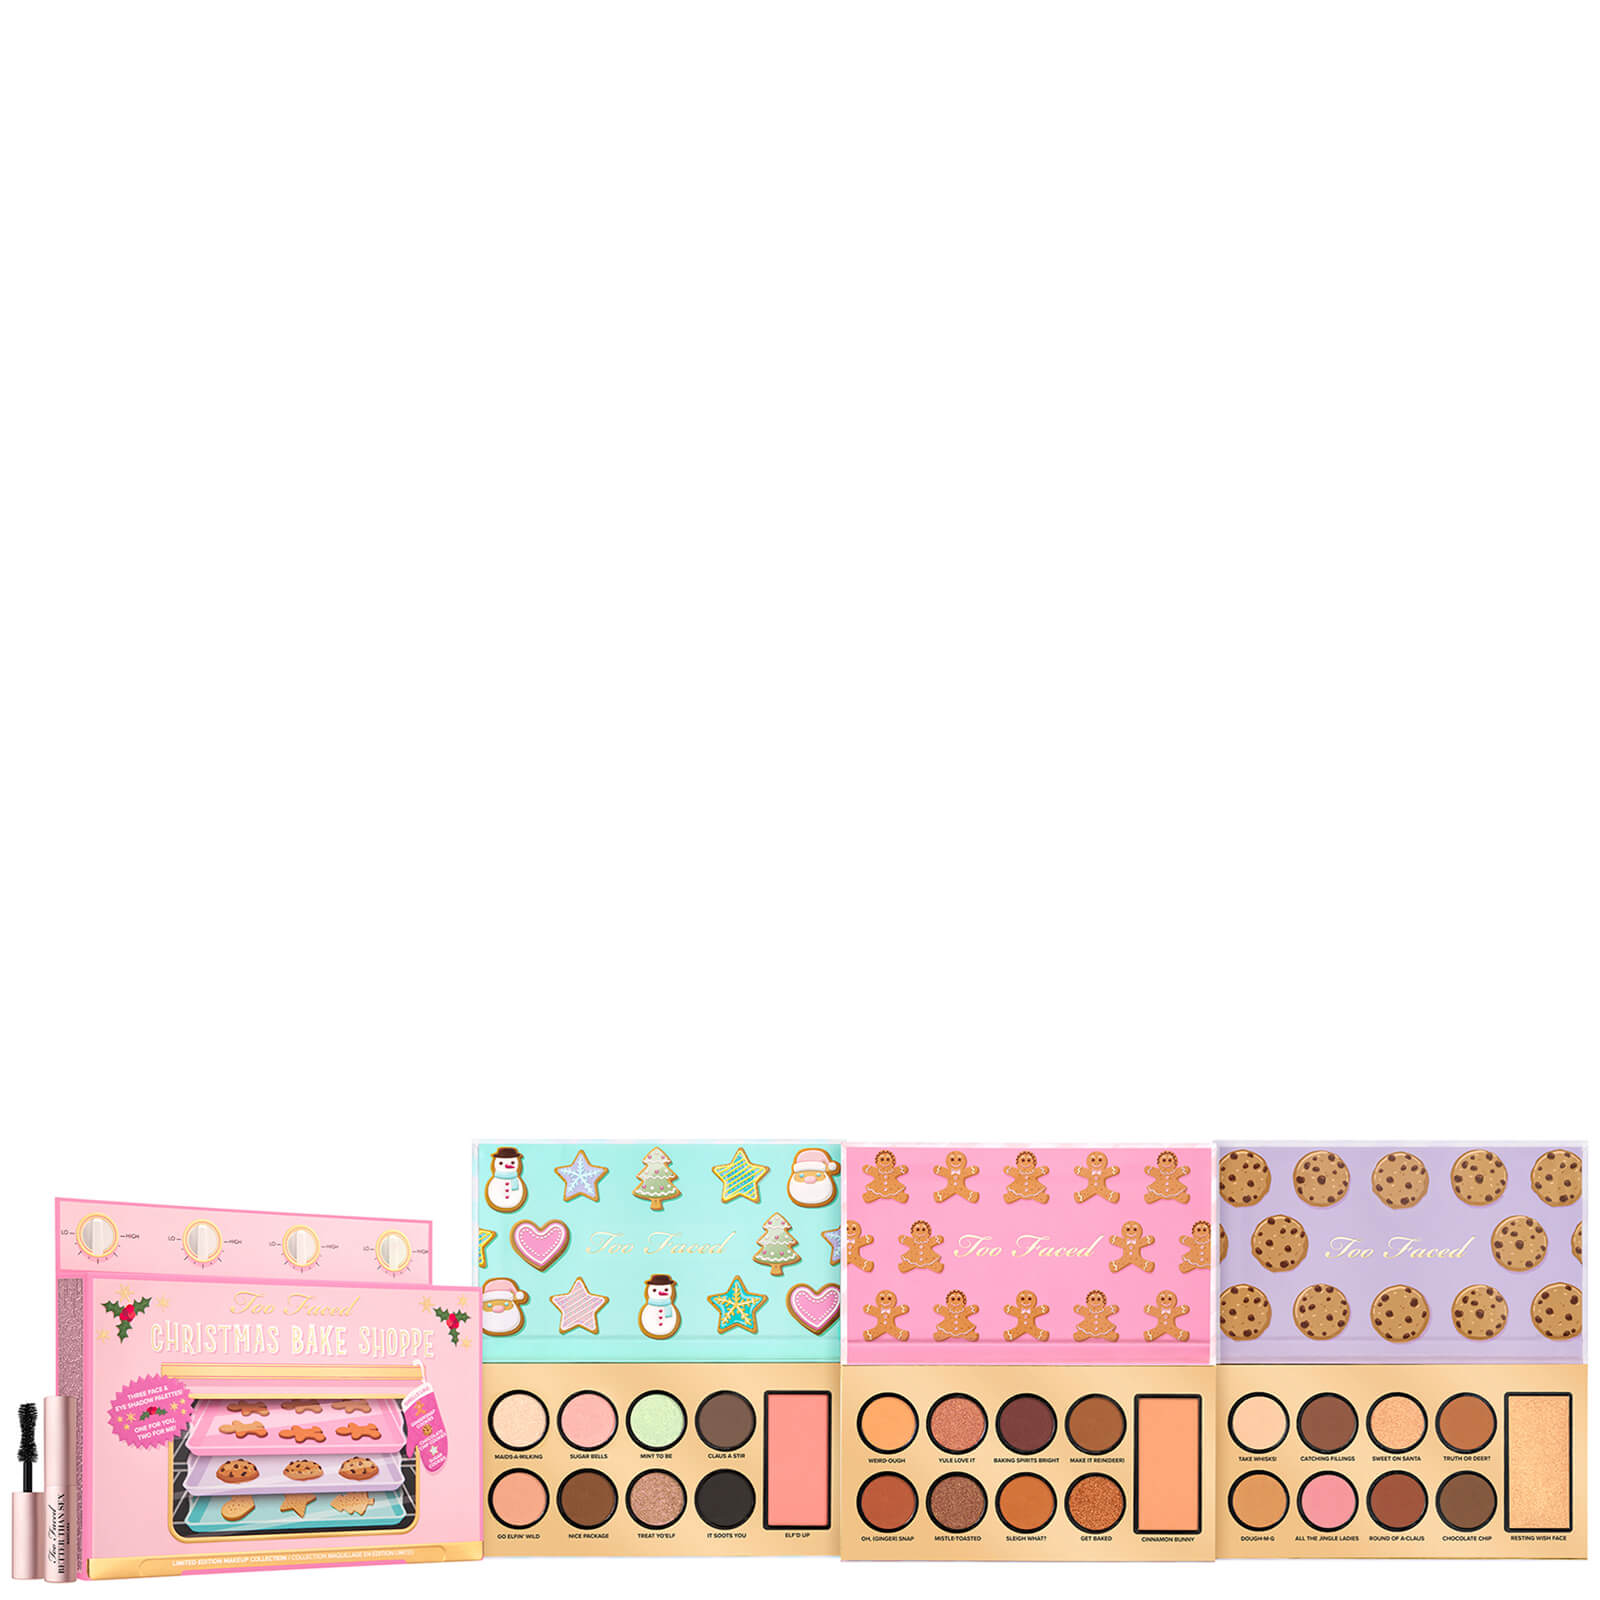 Too Faced Limited Edition Christmas Bake Shoppe Makeup Collection Set 